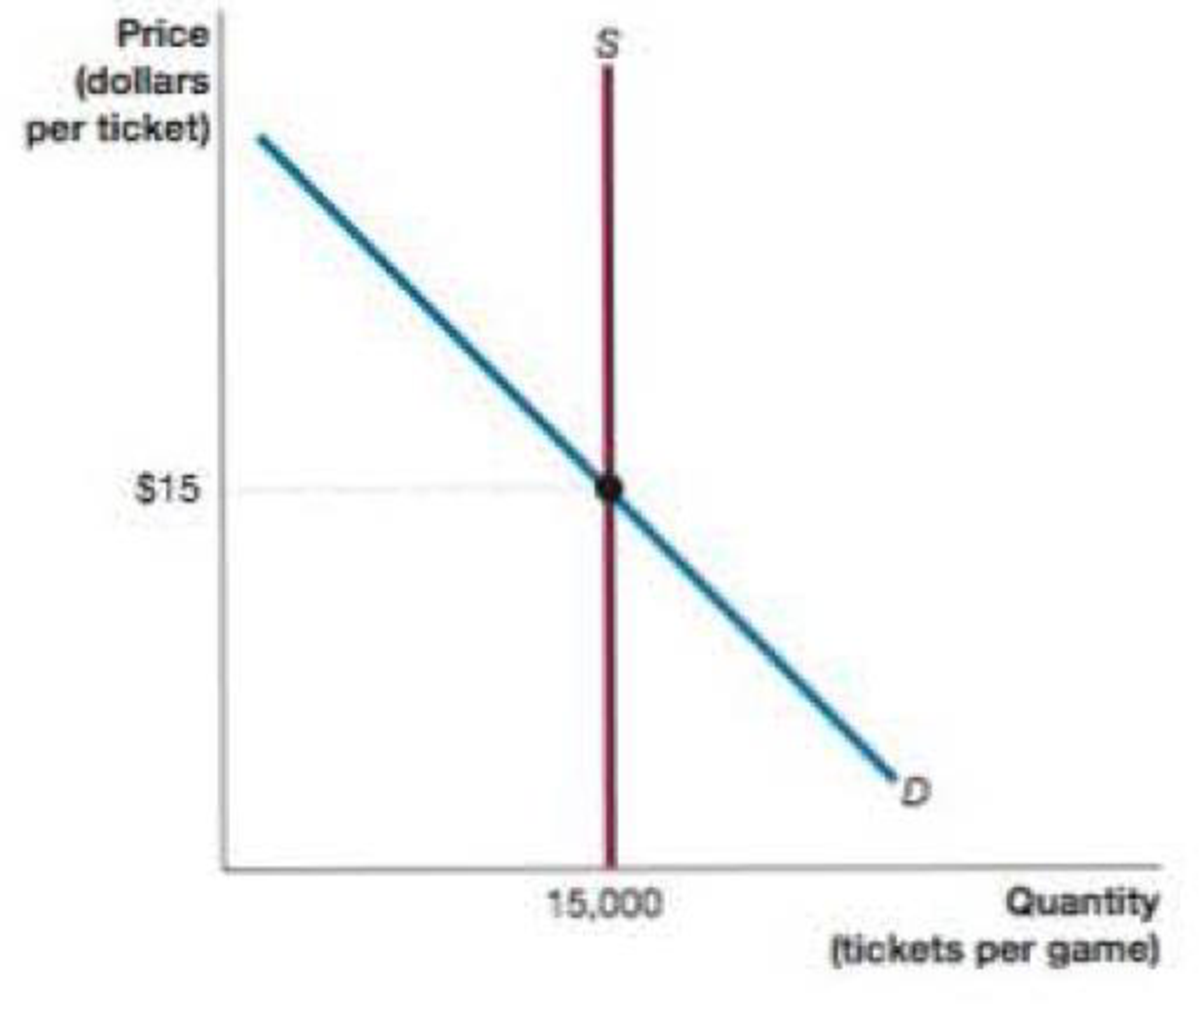 Chapter 6, Problem 6.6.9PA, Use the graph of the market for basketball tickets at State University on the next page to answer 